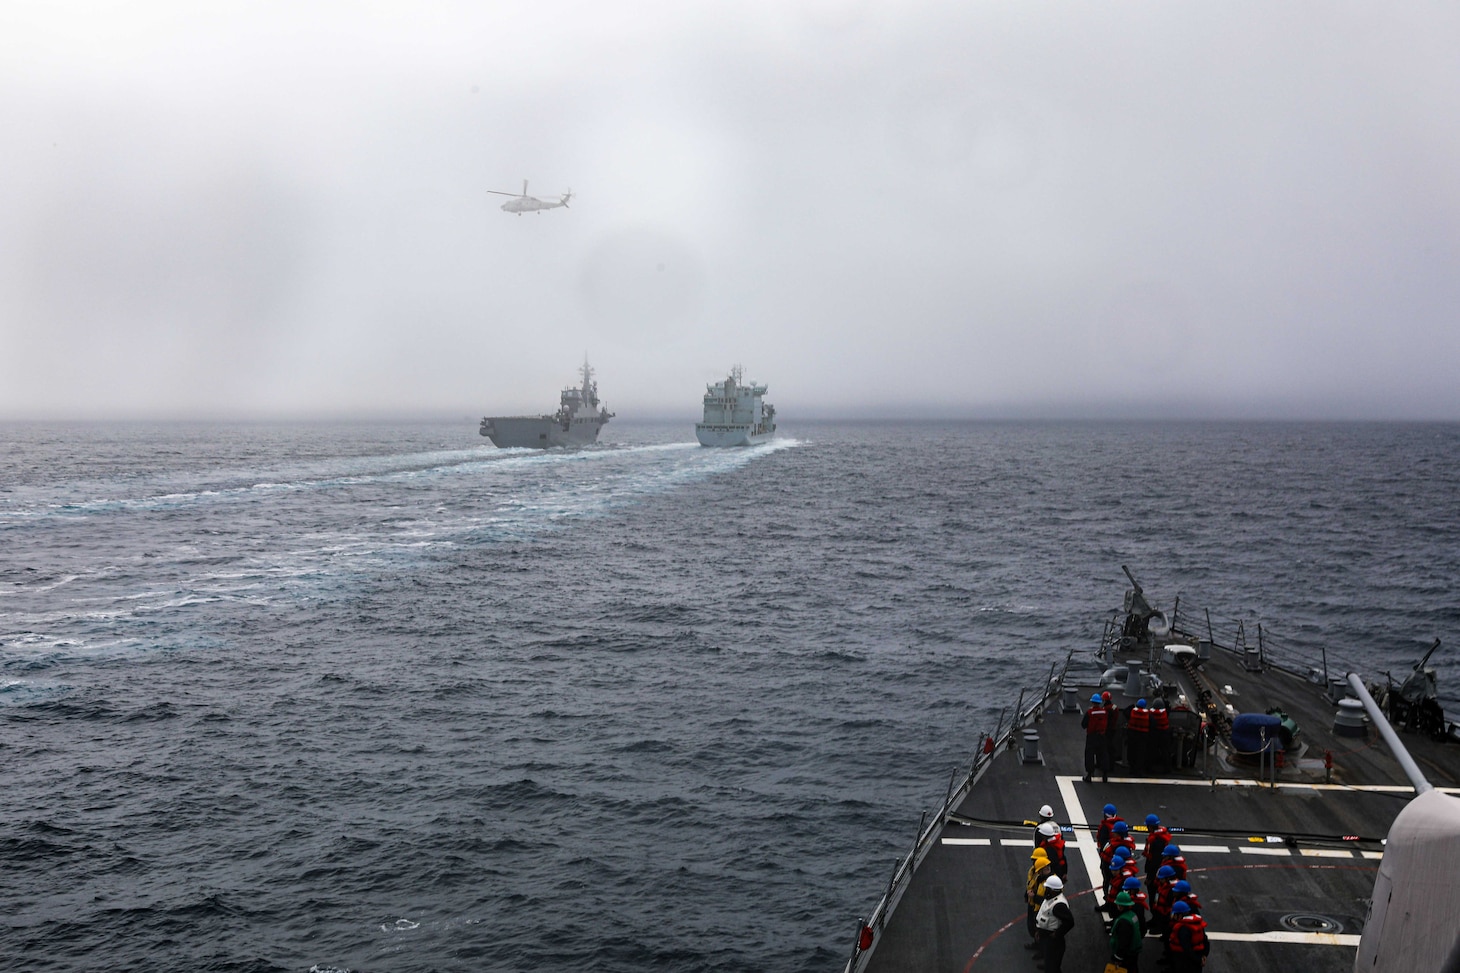 Royal Canadian Navy replenishment ship MV Asterix conducts a replenishment-at-sea with the Japanese Maritime Self-Defense Force JS Hyūga (DDH-181), while the Arleigh Burke-class guided-missile destroyer USS Benfold (DDG 65) stands by to conduct a replenishment-at-sea in the North Pacific Ocean on Aug. 25.